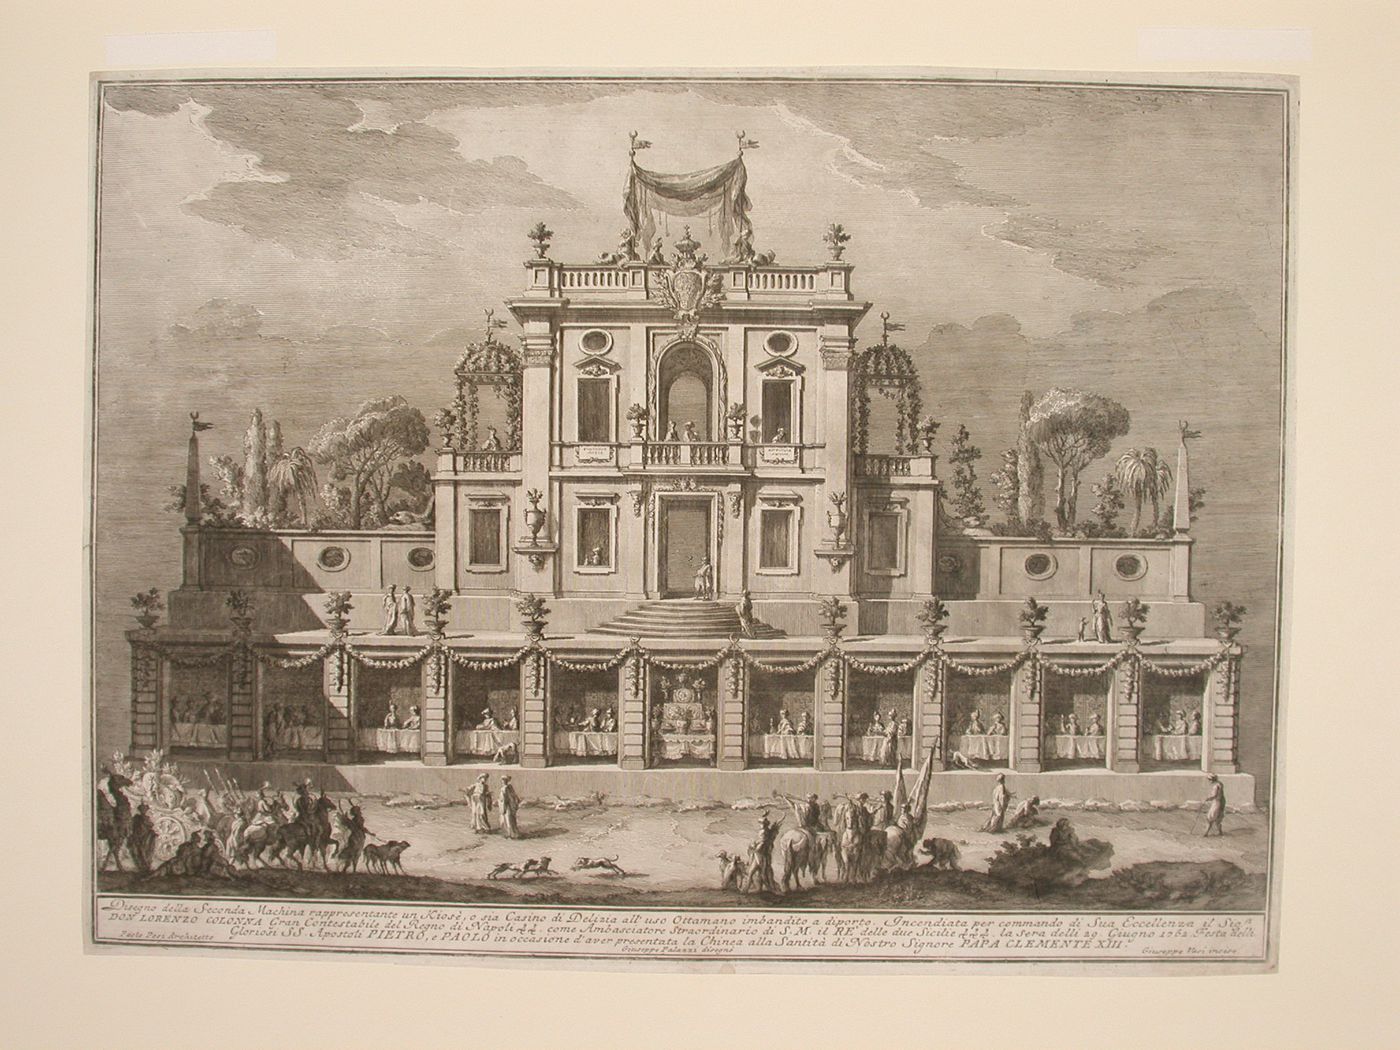 Etching of Posi's design for the "seconda macchina" of 1762